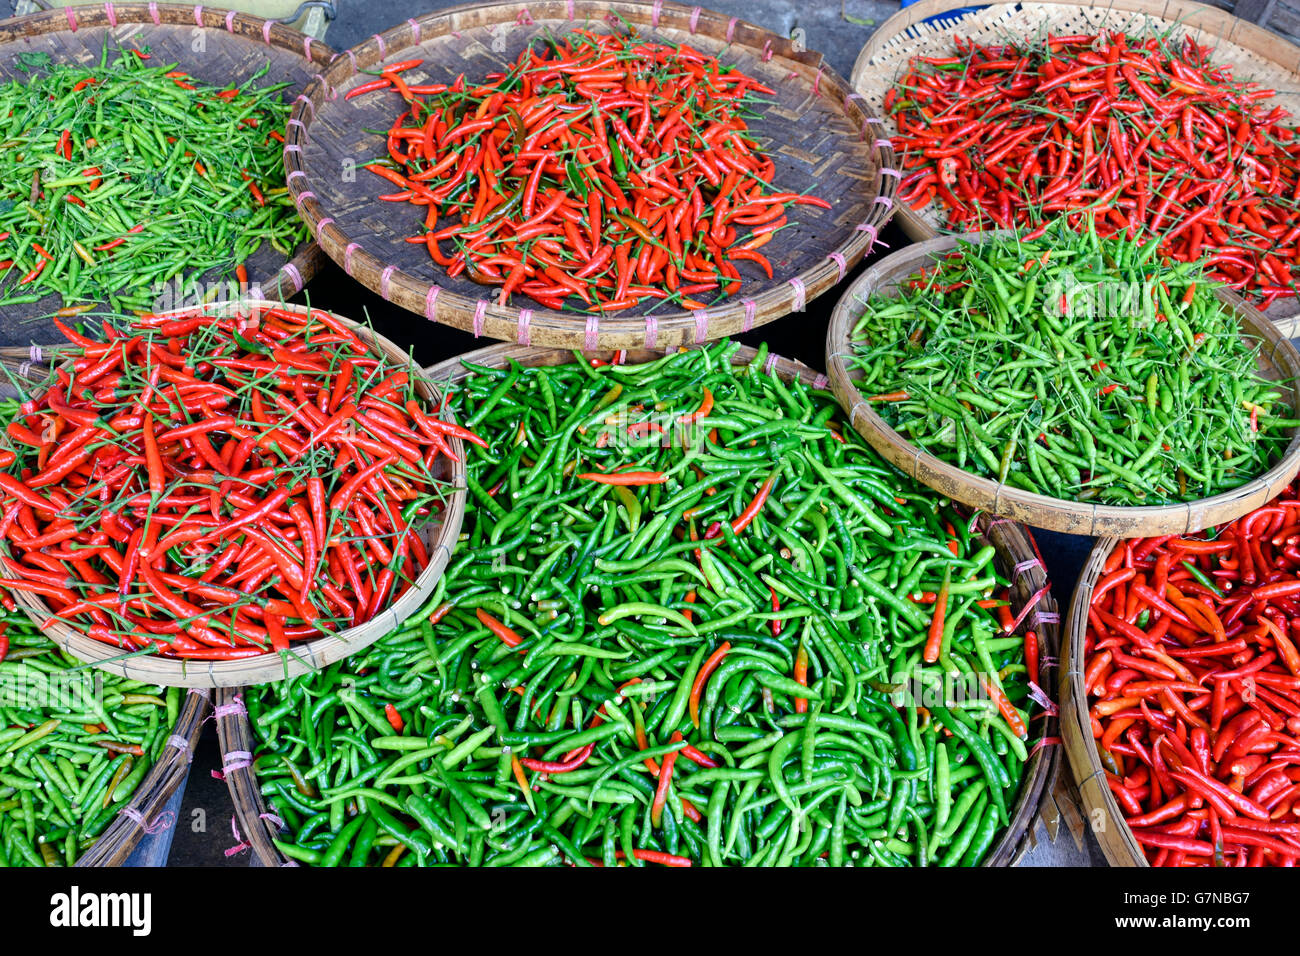 An arrangement of red and green Thai chili peppers in an Asian market in Thailand. Stock Photo